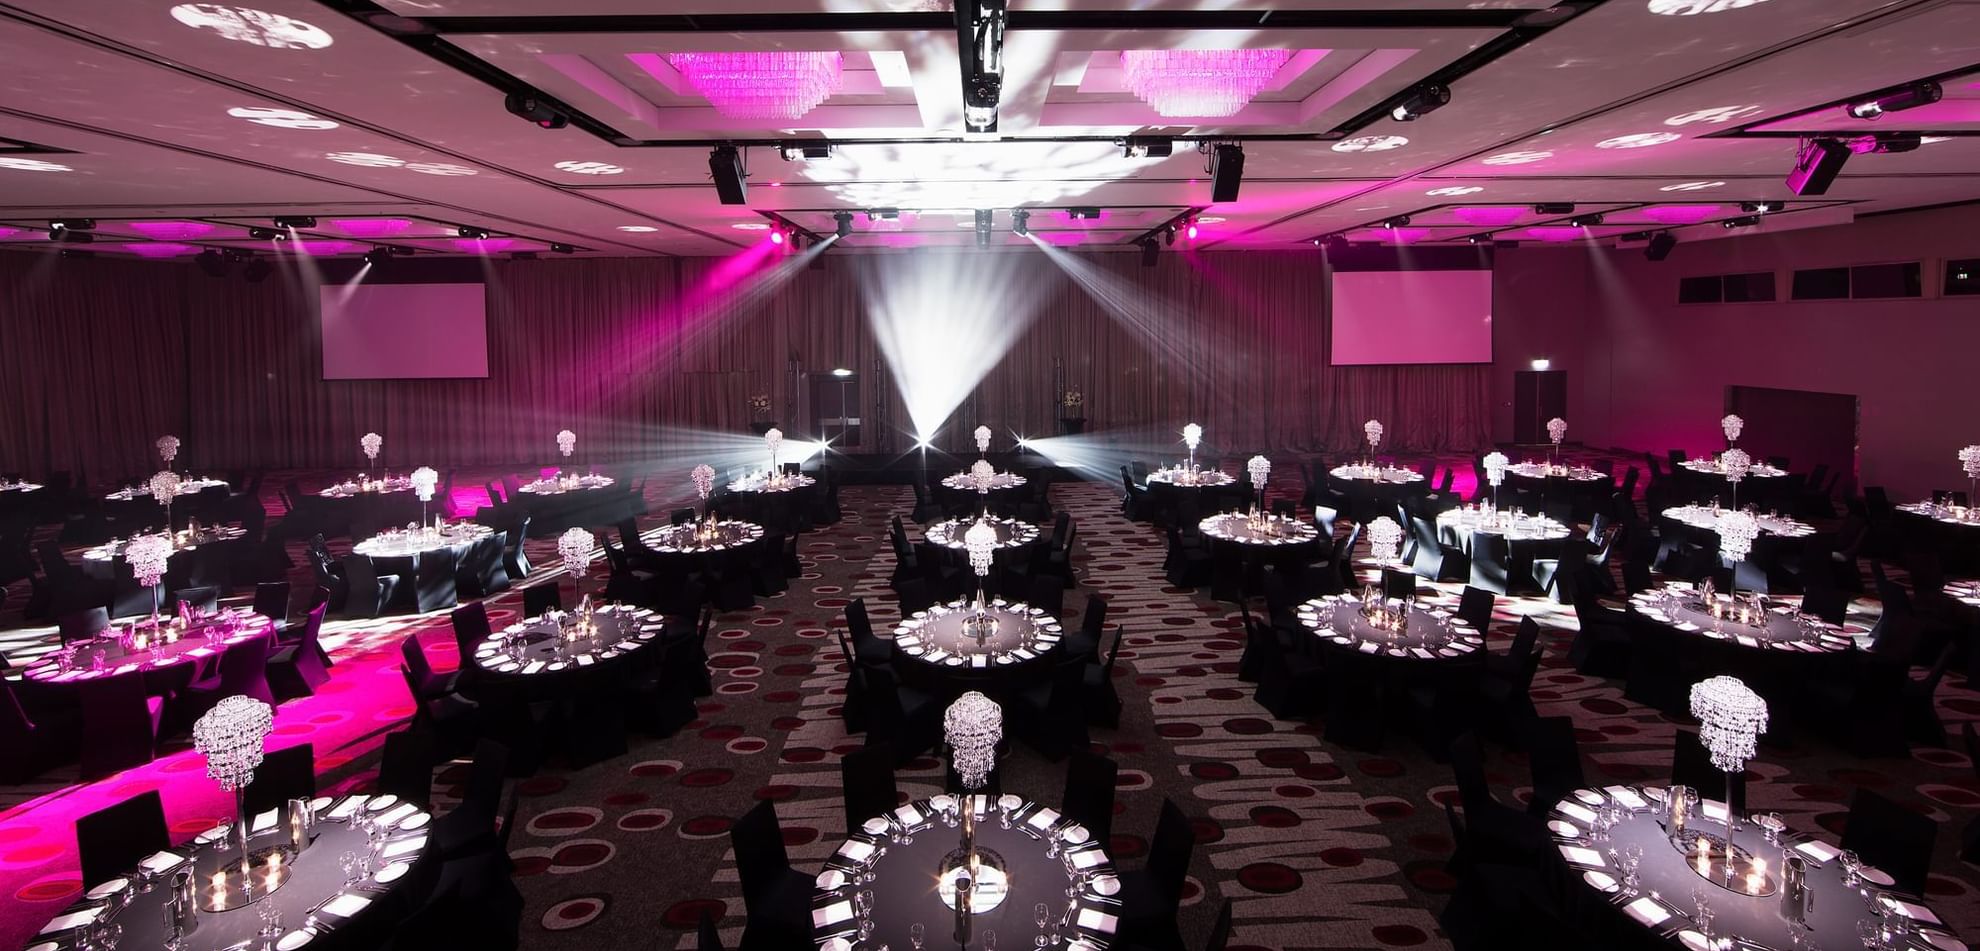 Banquet set-up in illuminated Grand Ballroom with carpeted floors at Pullman Albert Park